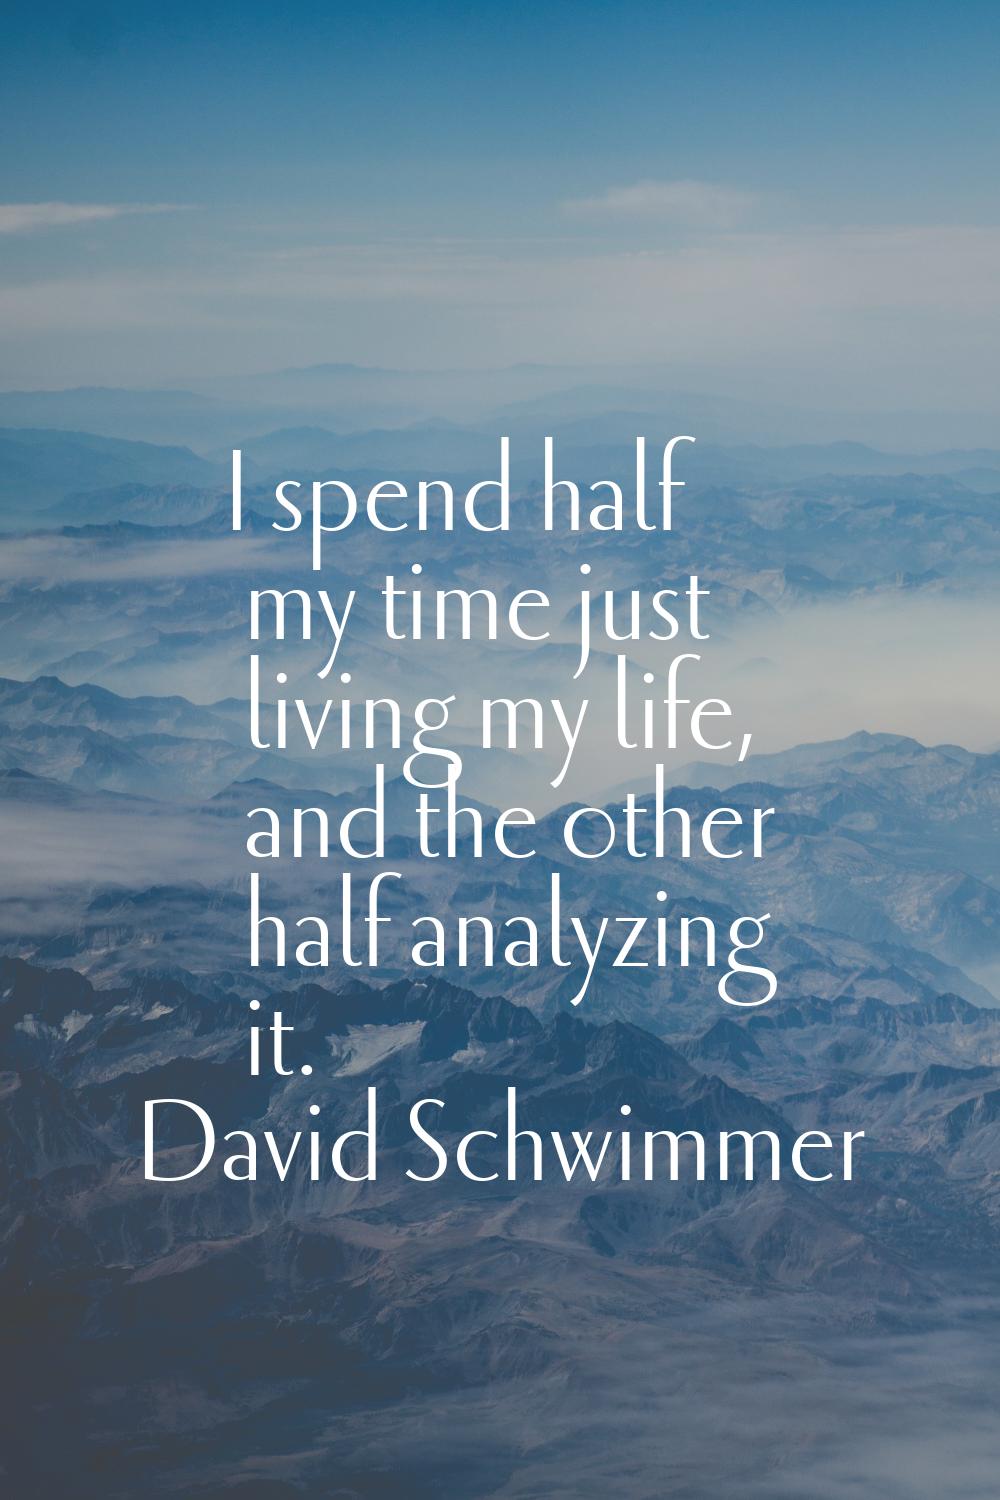 I spend half my time just living my life, and the other half analyzing it.